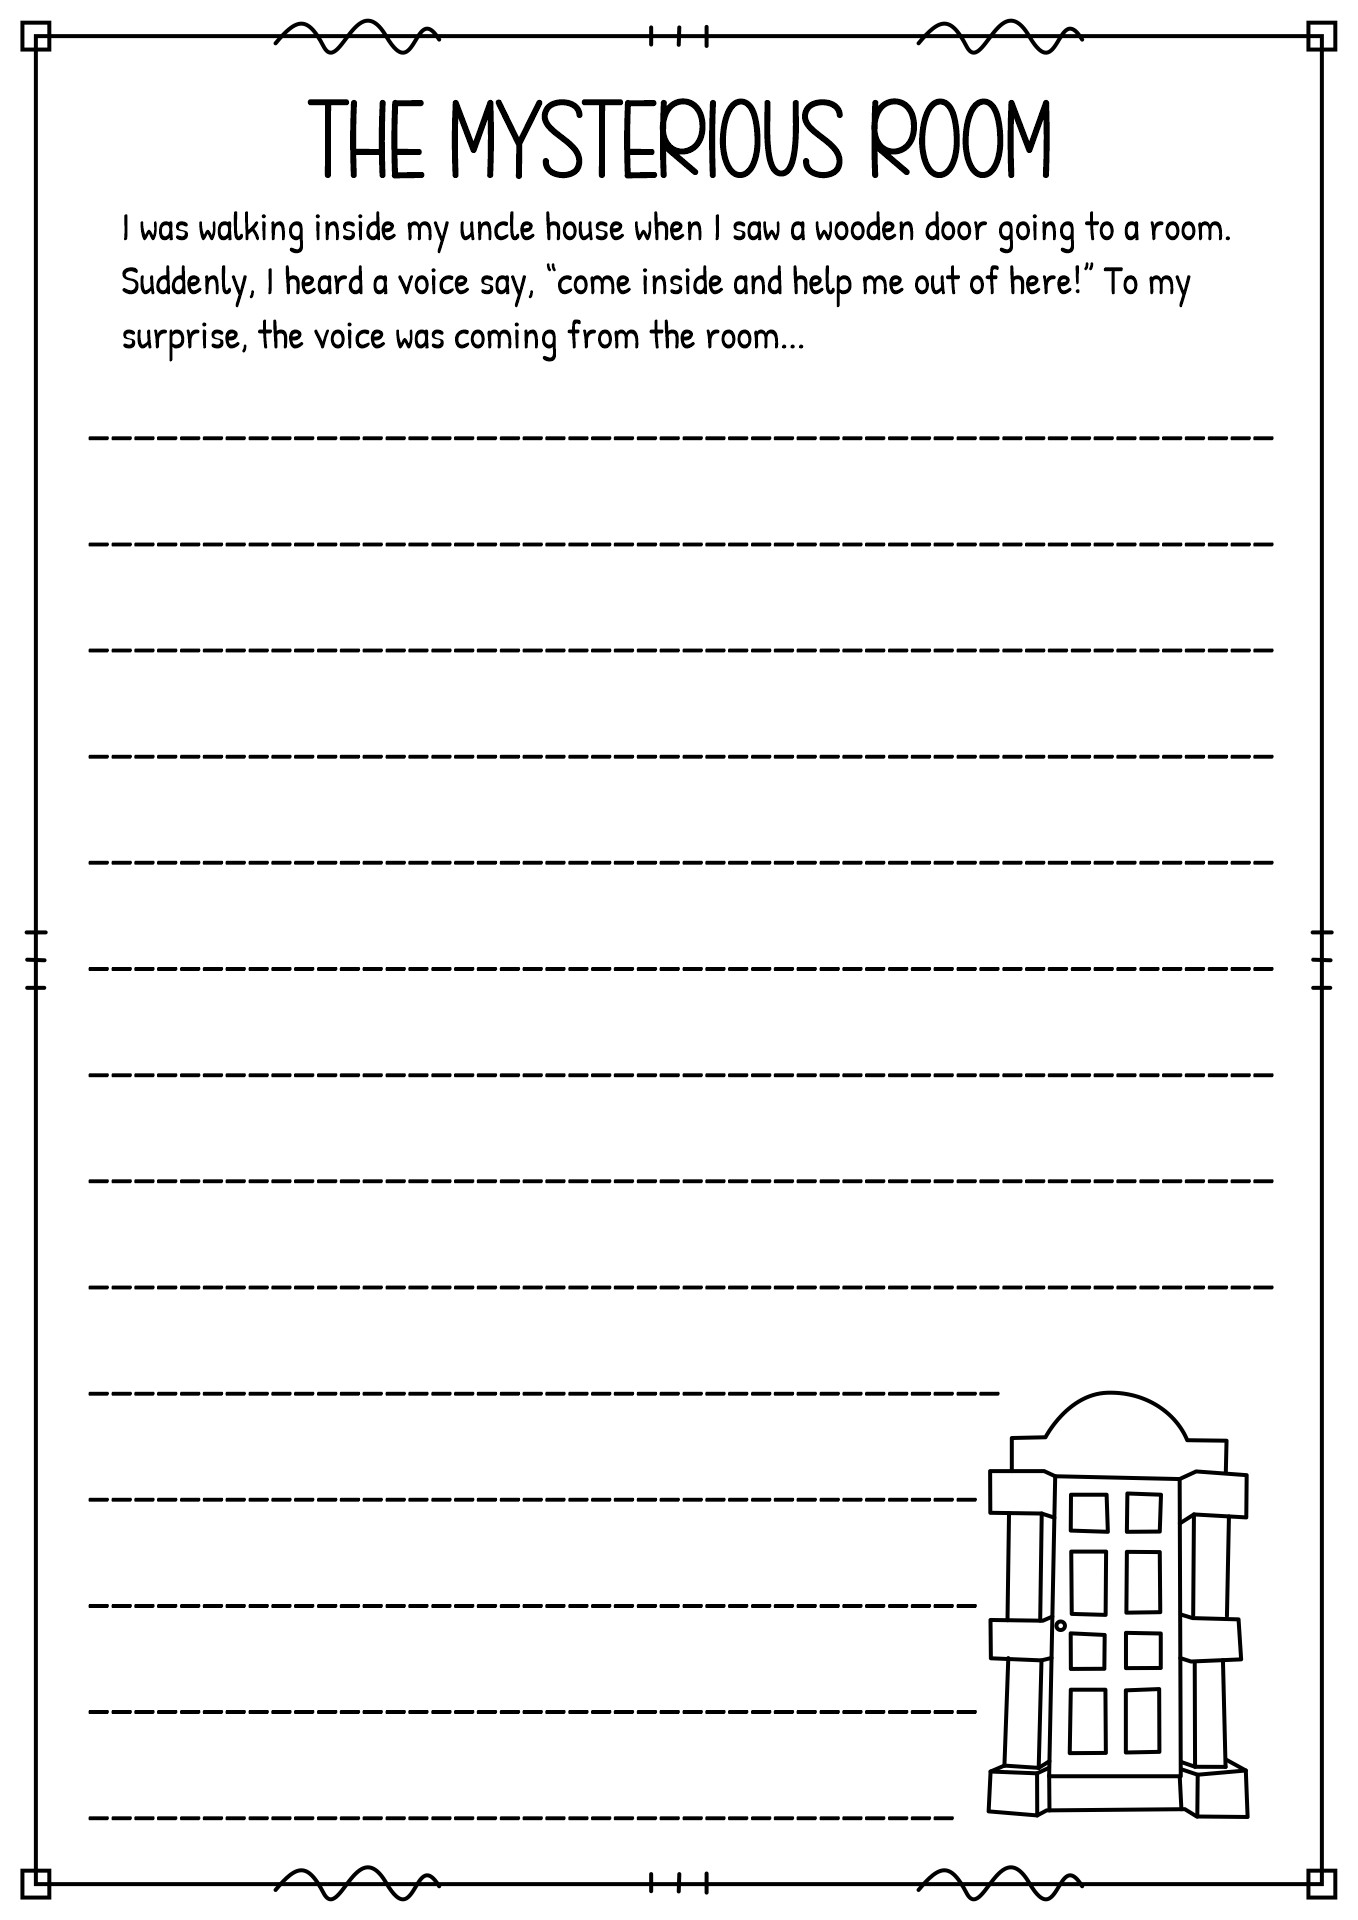 13-best-images-of-printable-worksheets-on-reflections-student-behavior-reflection-sheet-draw